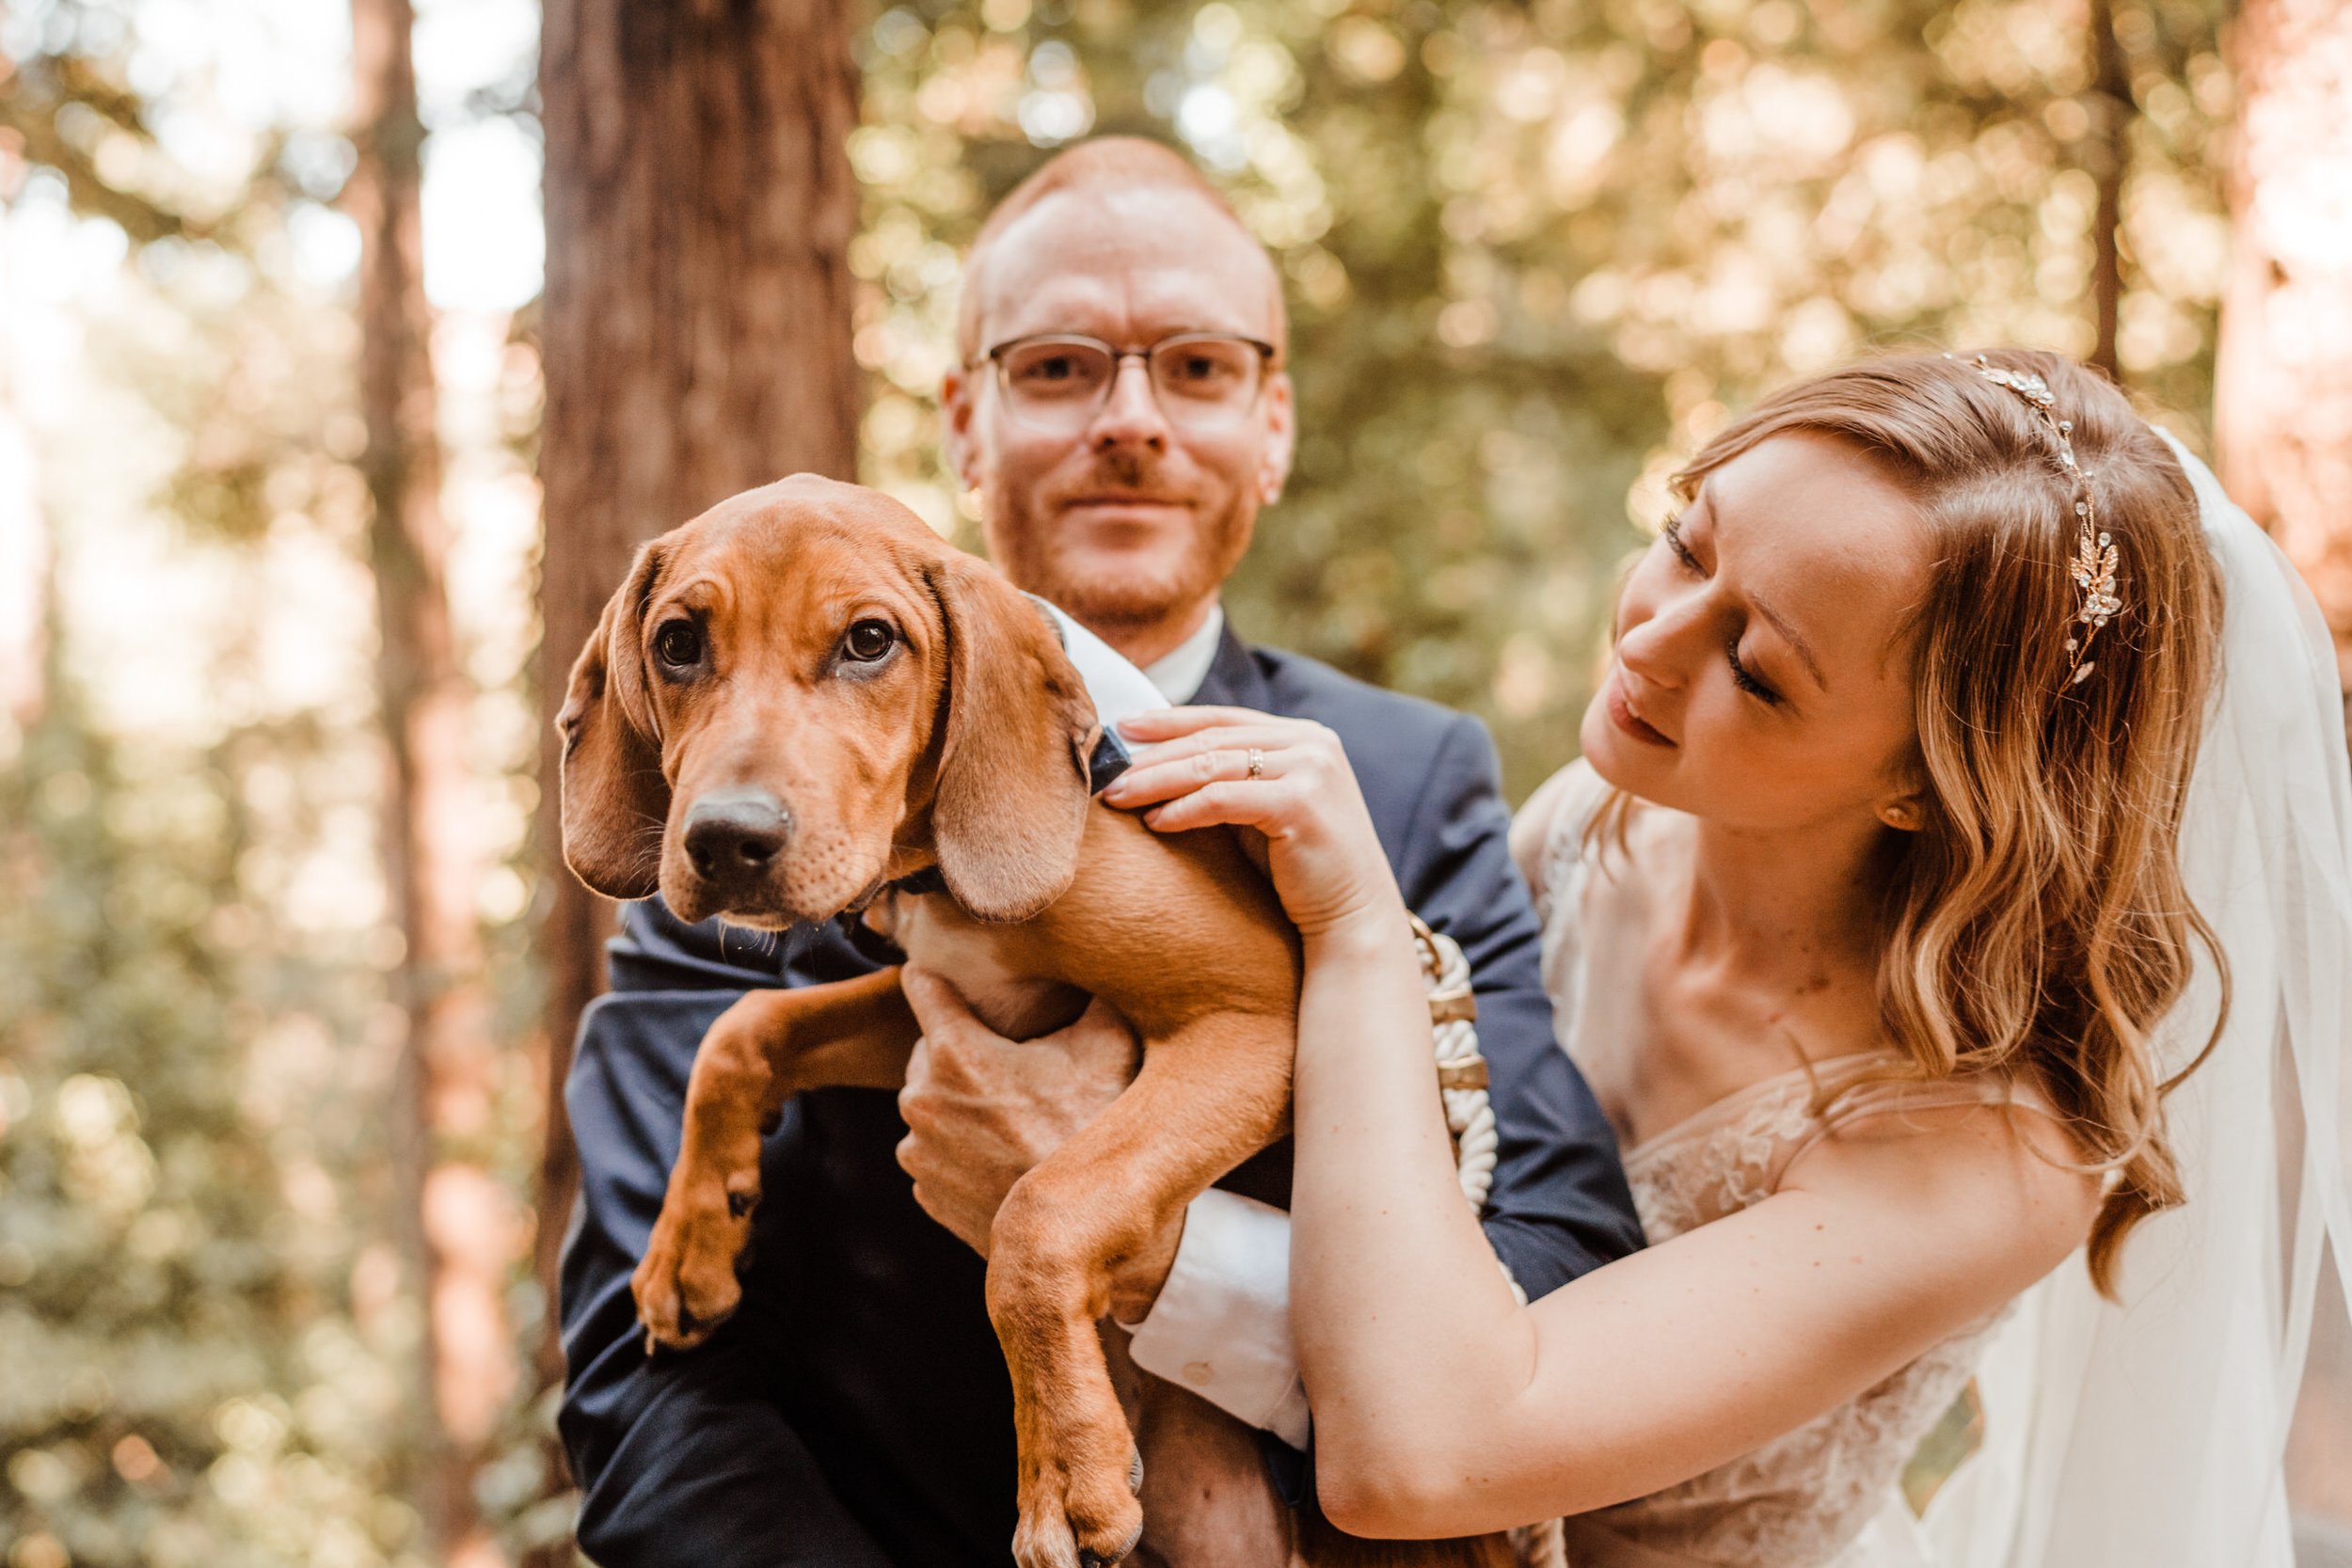 Wedding-in-the-Woods-Bride-and-Groom-Holding-Rescue-Puppy-at-Elopement-beneath-Redwood-Trees (1).jpg